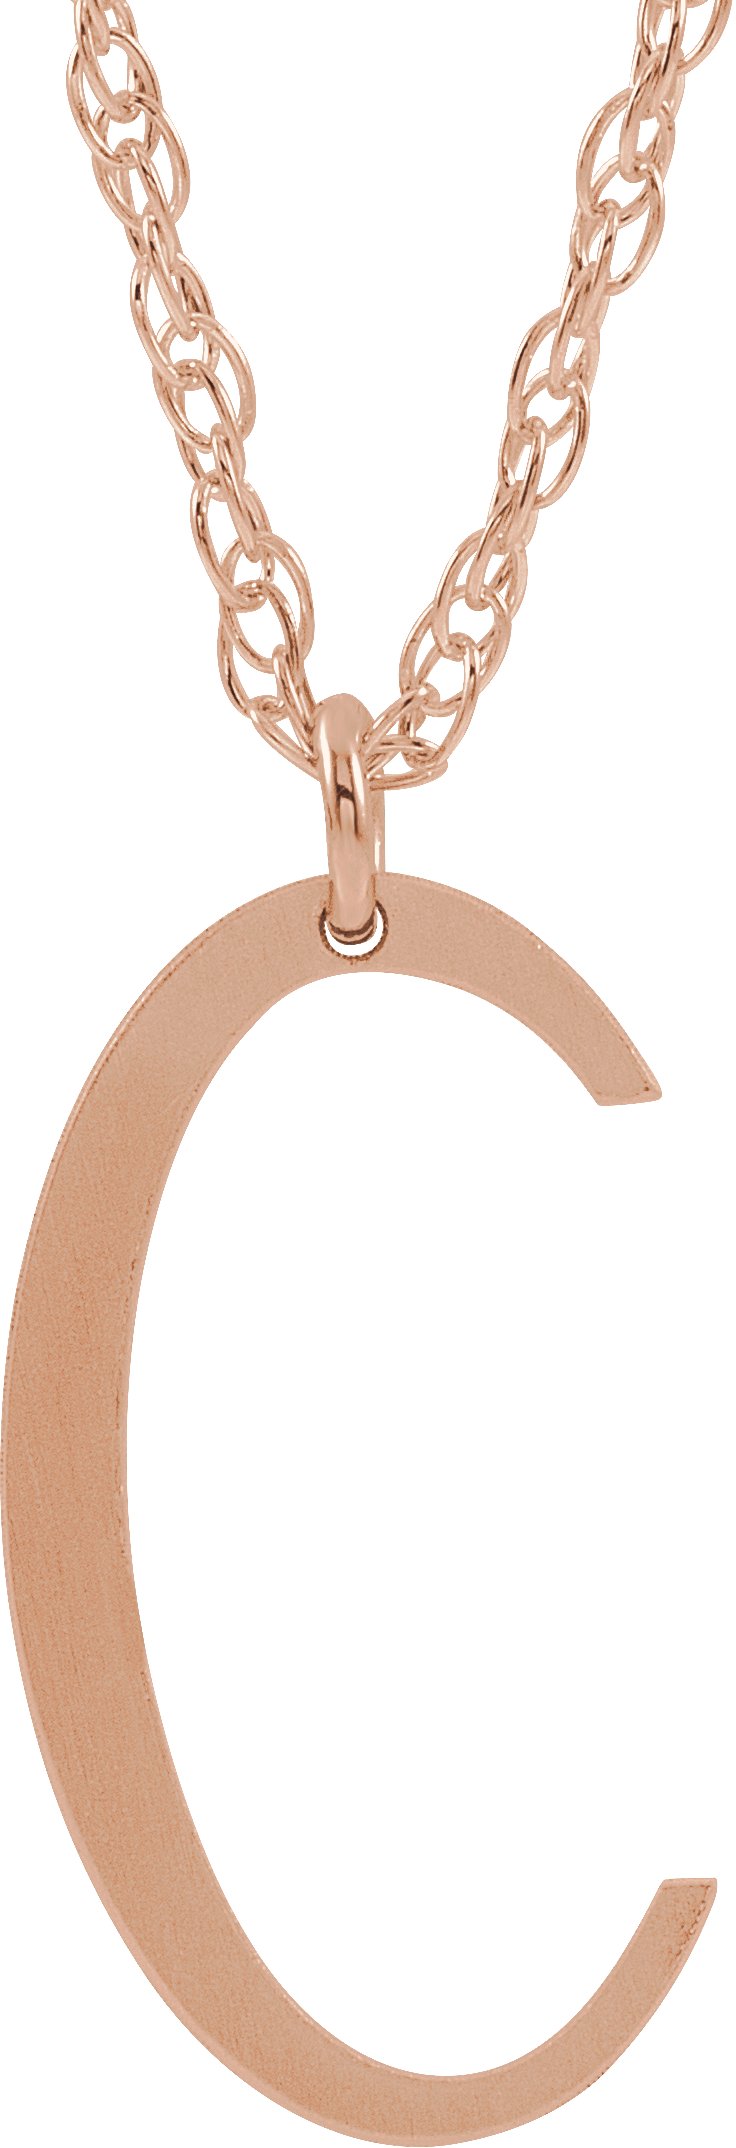 14K Rose Gold-Plated Sterling Silver Block Initial C 16-18" Necklace with Brush Finish